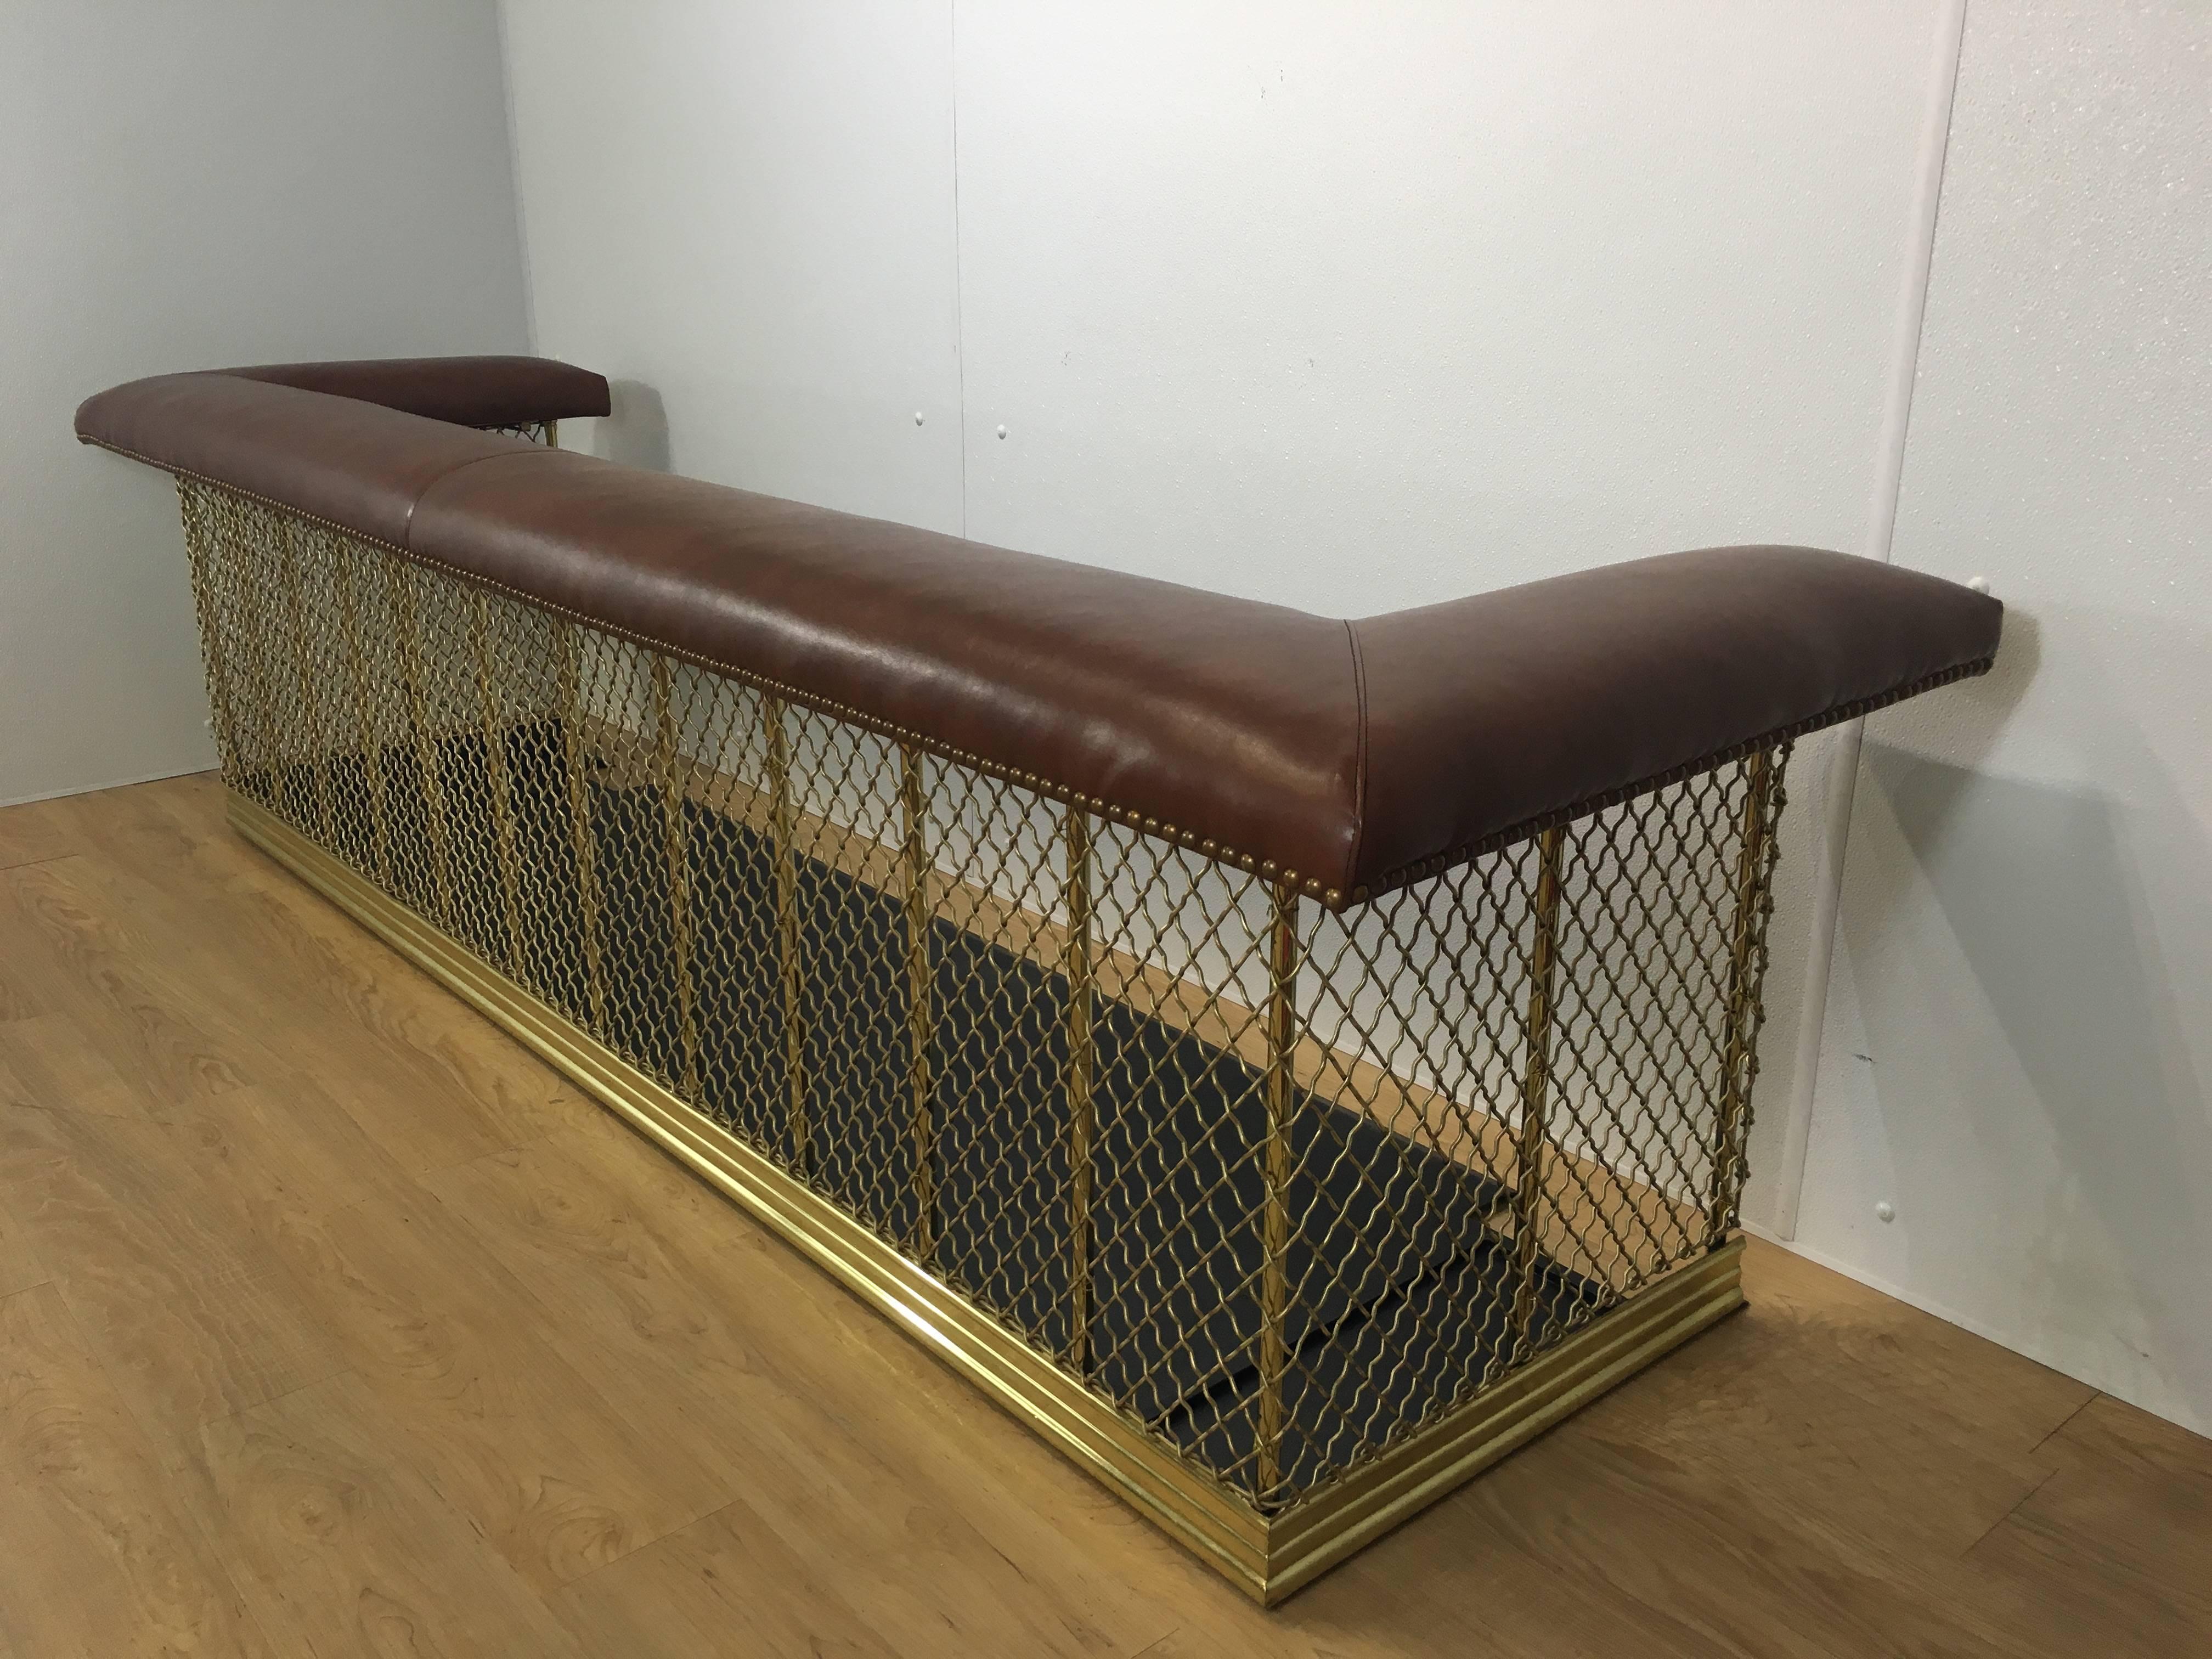 Monumental (over seven feet long) 19th century English brass and leather club fender with newly upholstered leather cushion and interior brass hooks for tools. Finely cast brass wire mesh surround with columns mounted on cast iron platform.
Two